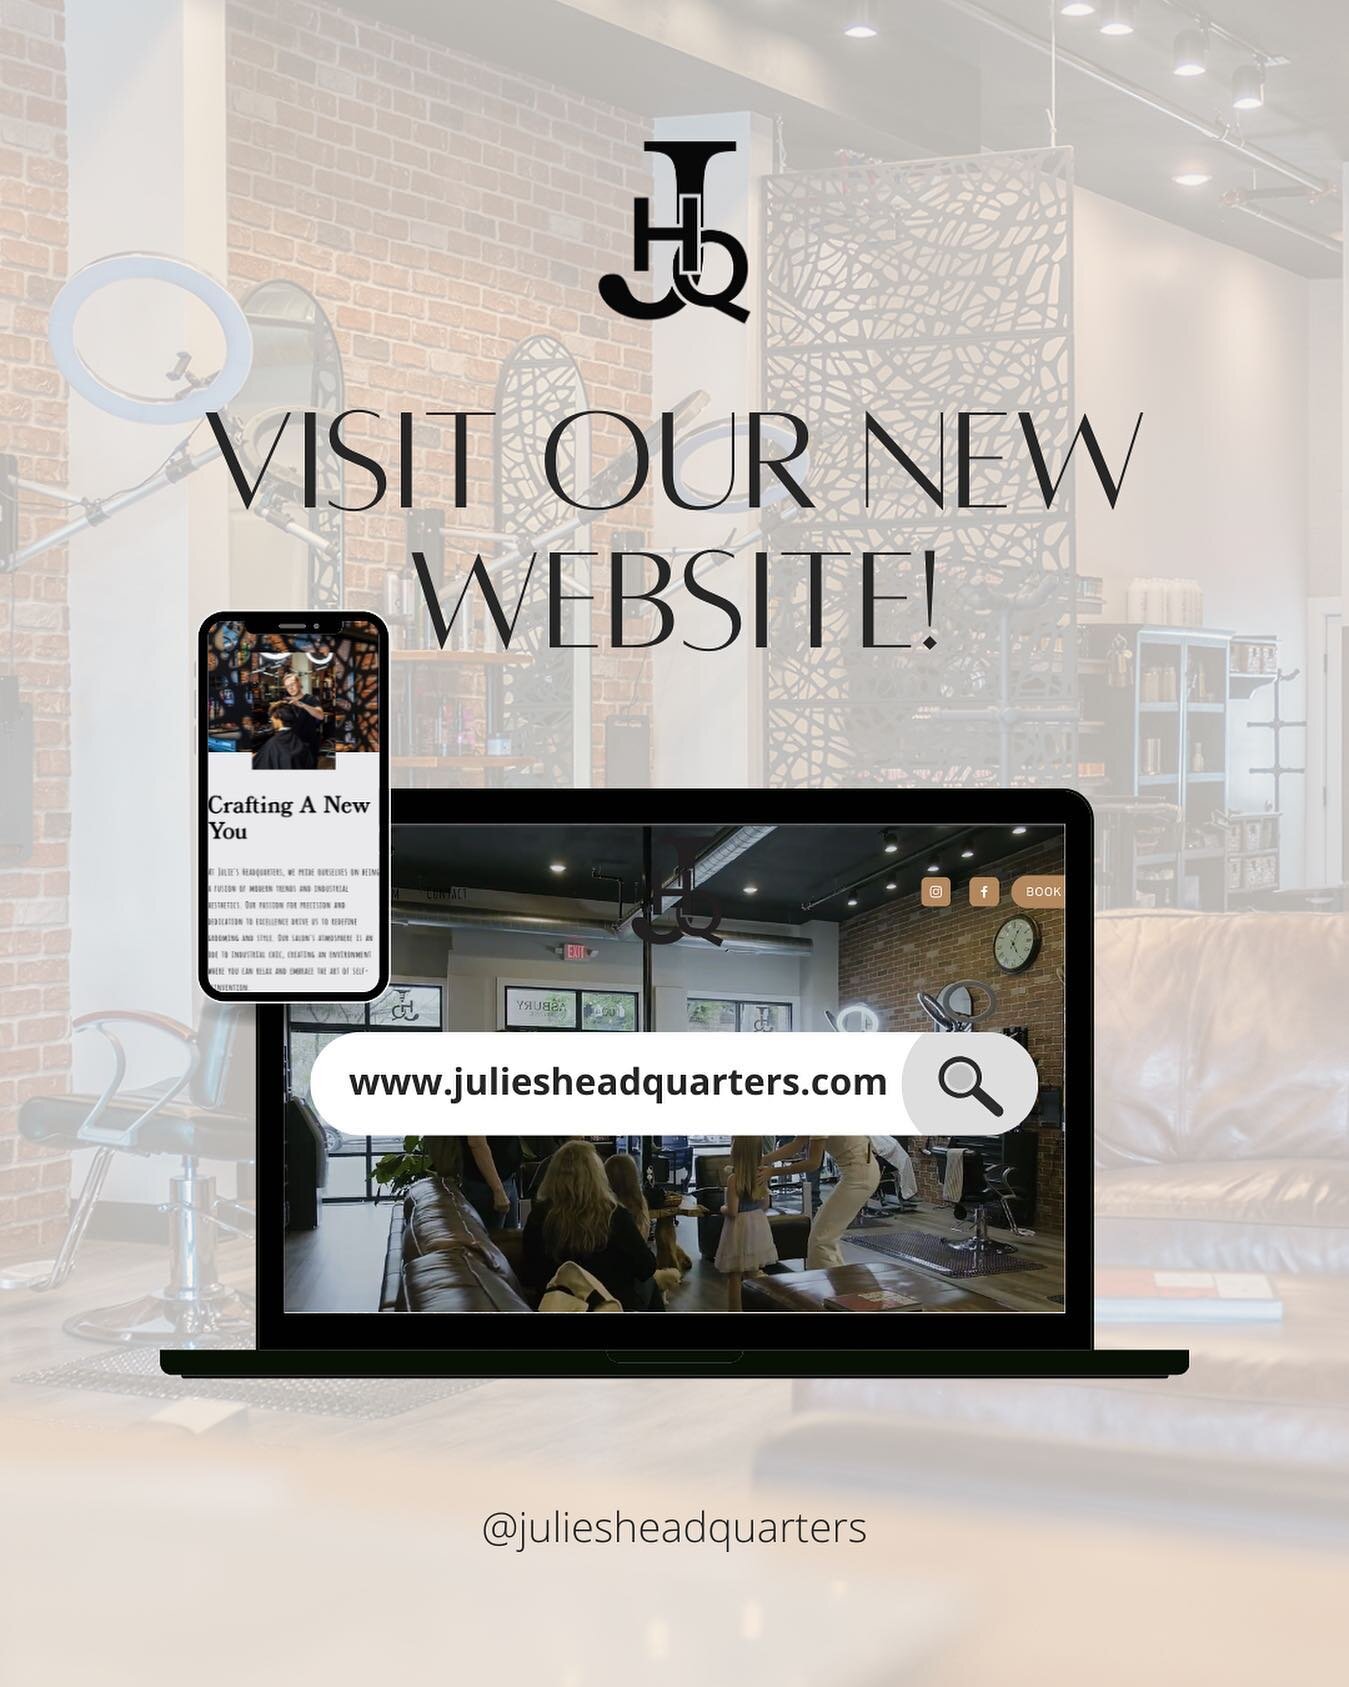 Thanks to the incredible talent of @benhalephoto, we've revamped our website with seamless online booking, more info about us and a chance to meet our fantastic team. 

Explore, book, and experience. Link in bio!
Juliesheadquarters.com

&mdash;

#Jul